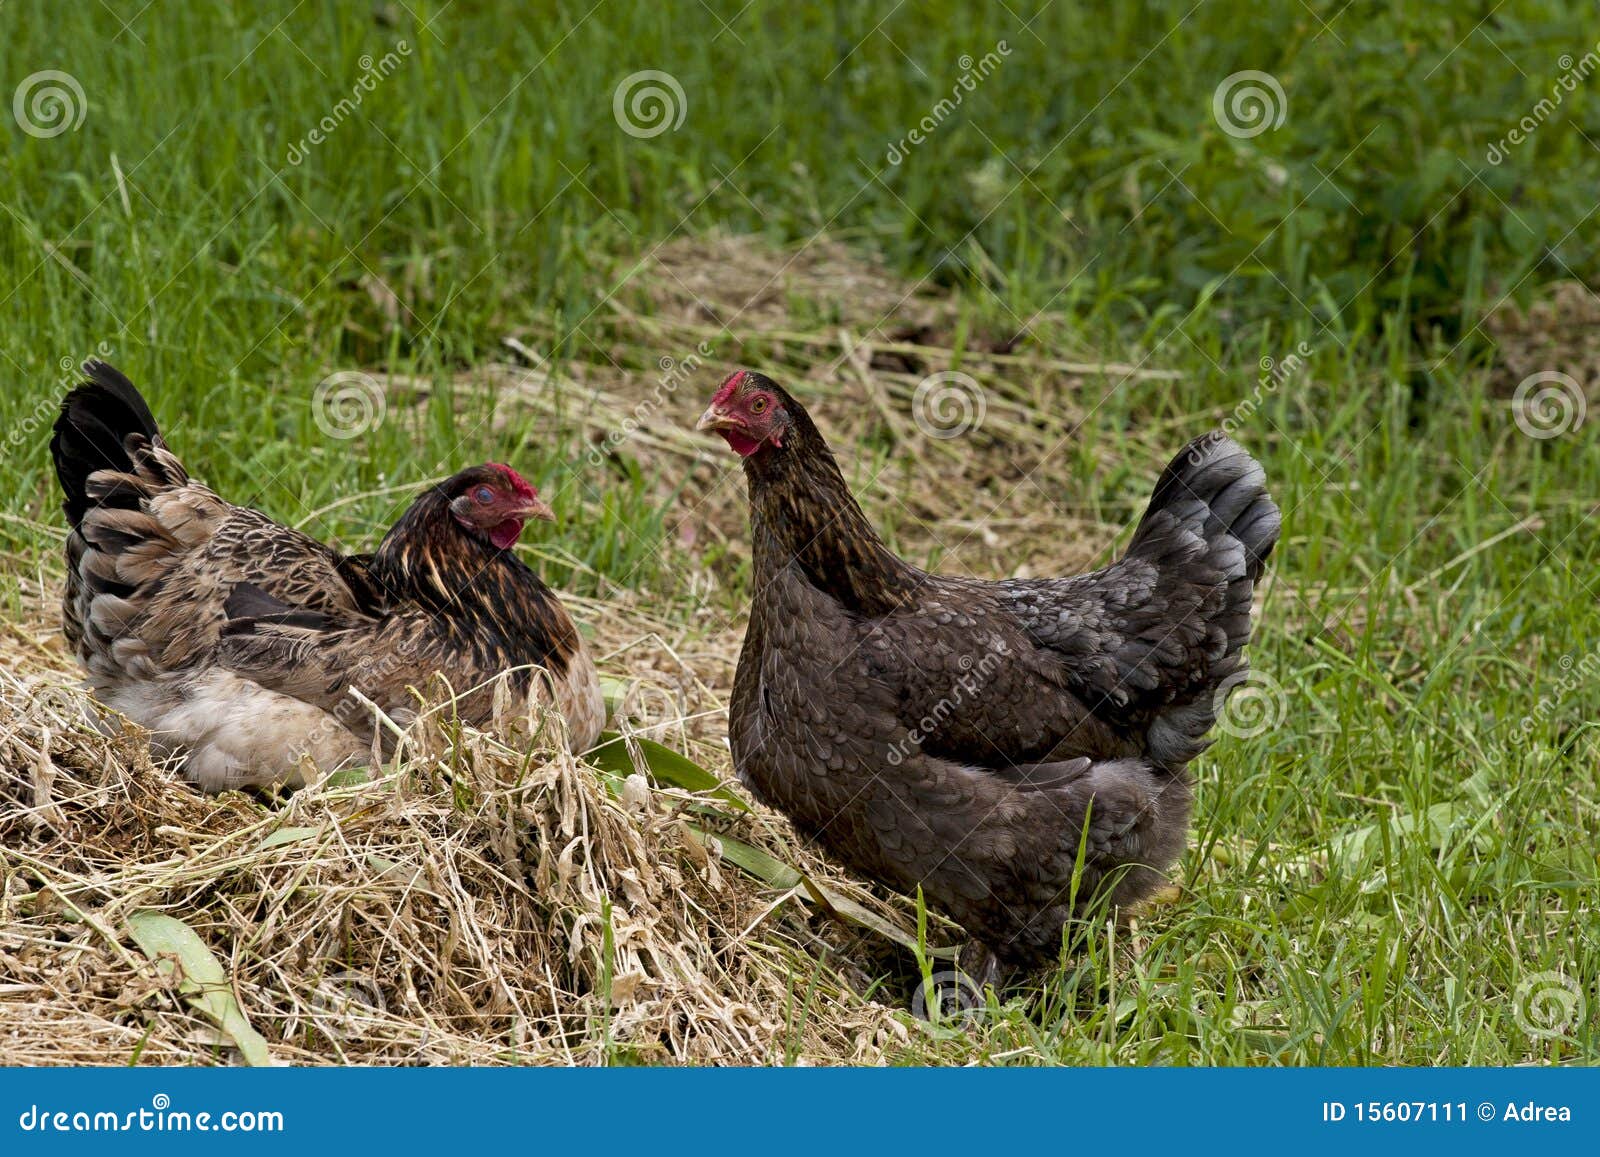 327 Cold Chickens Stock Photos - Free & Royalty-Free Stock Photos